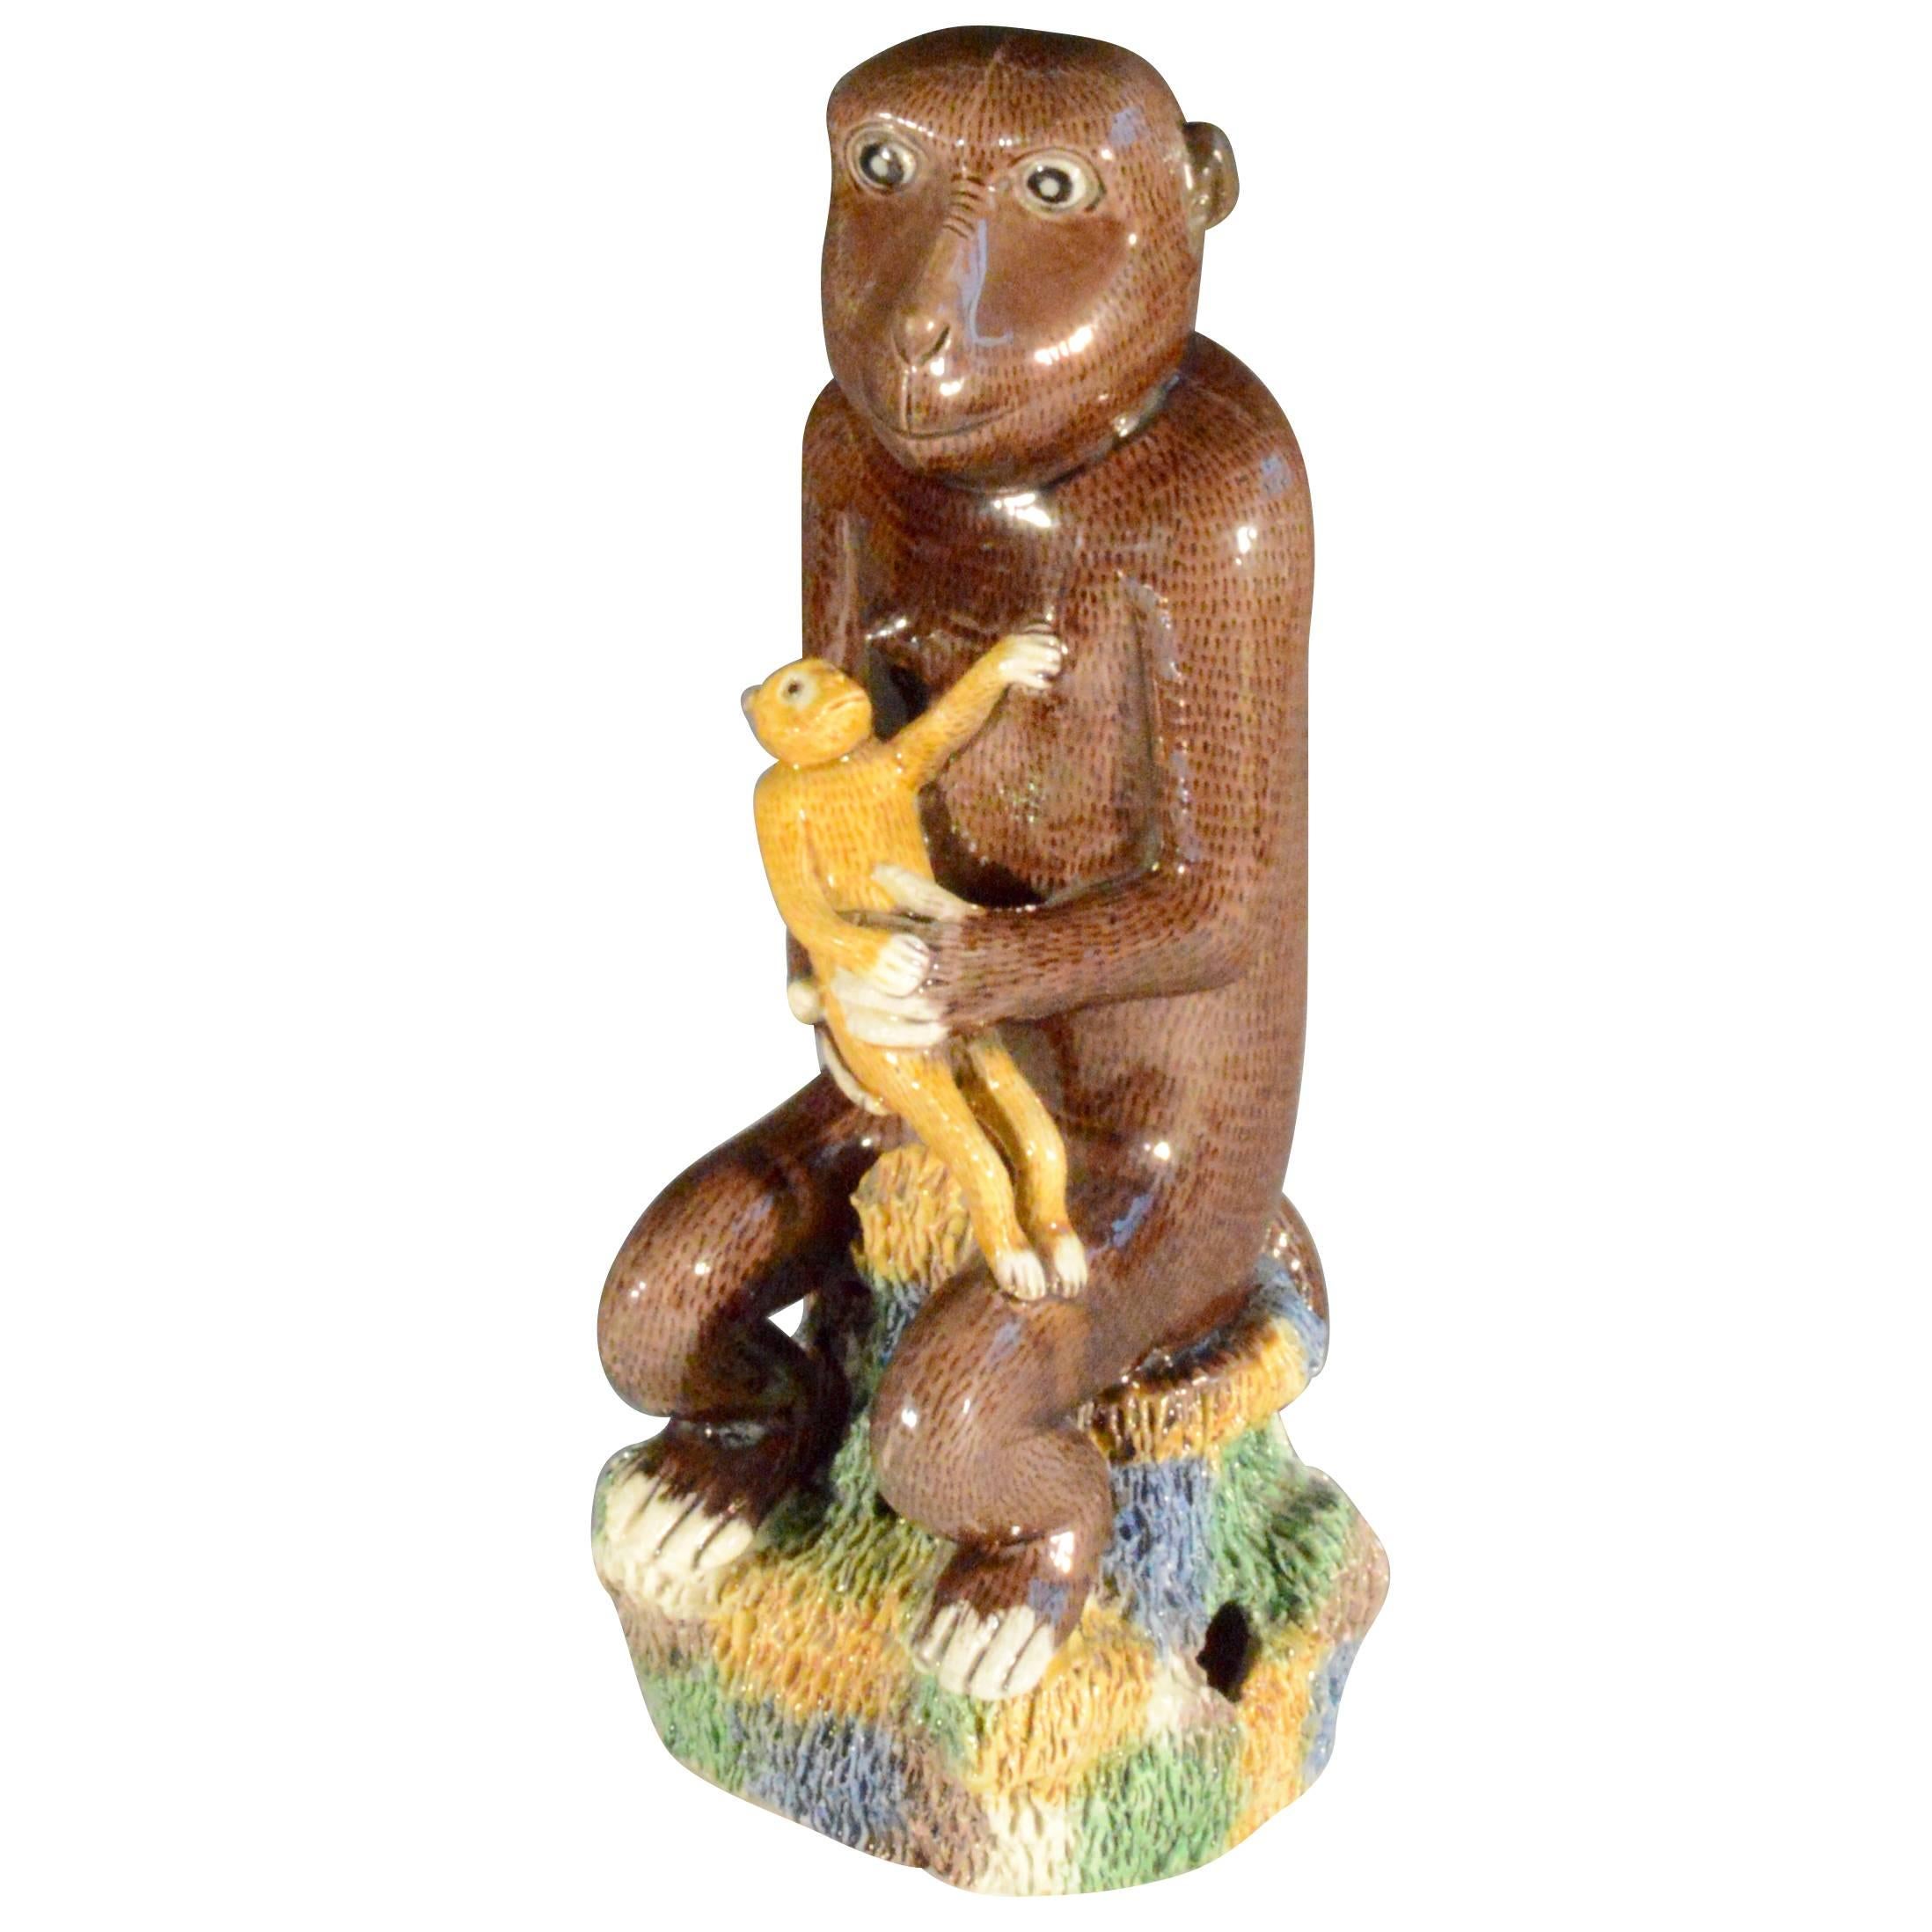 Chinese Export Glazed Biscuit Model of Monkey, 18th-Early 19th Century